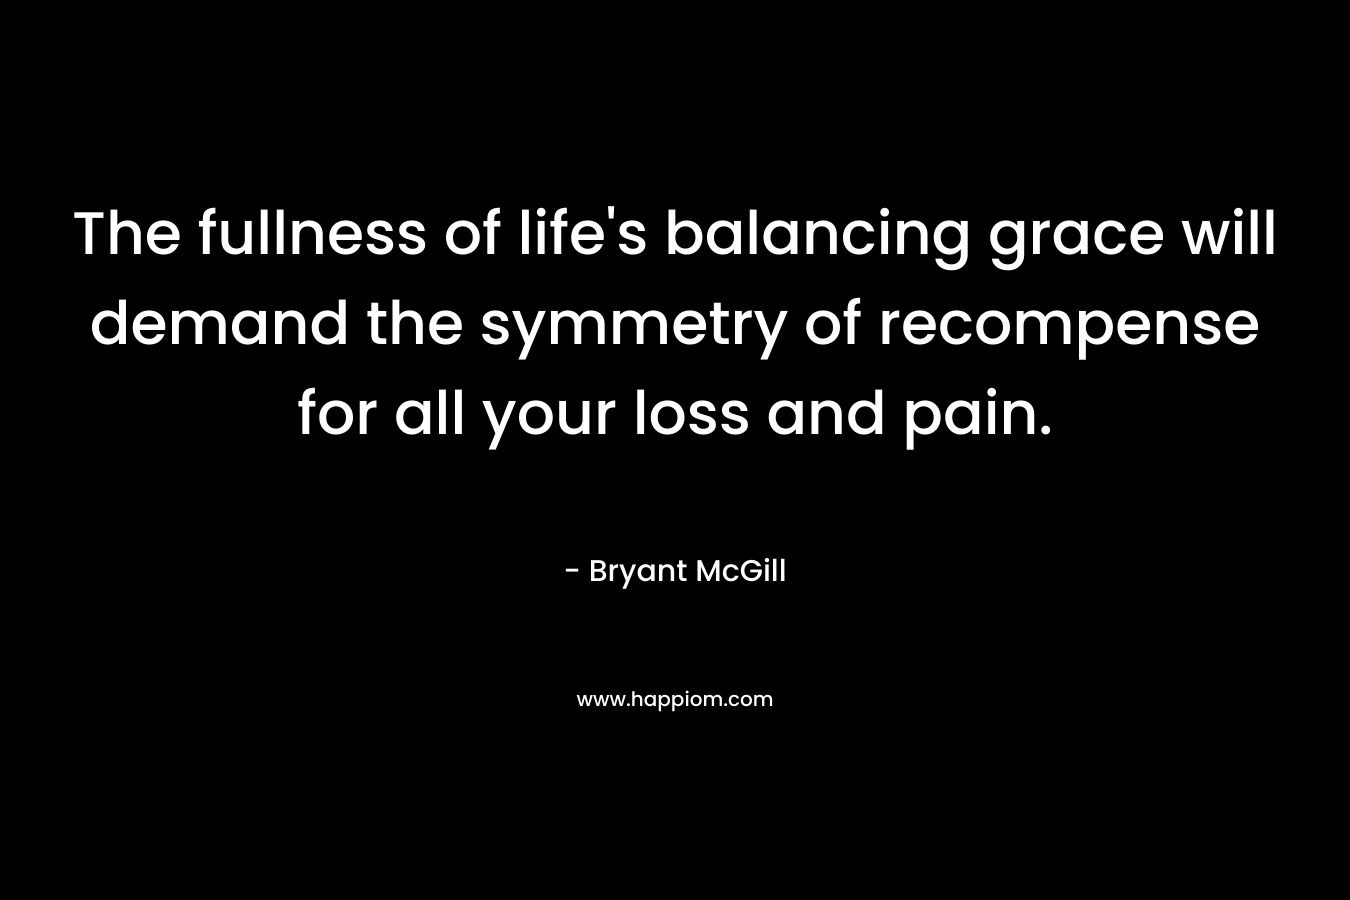 The fullness of life’s balancing grace will demand the symmetry of recompense for all your loss and pain. – Bryant McGill